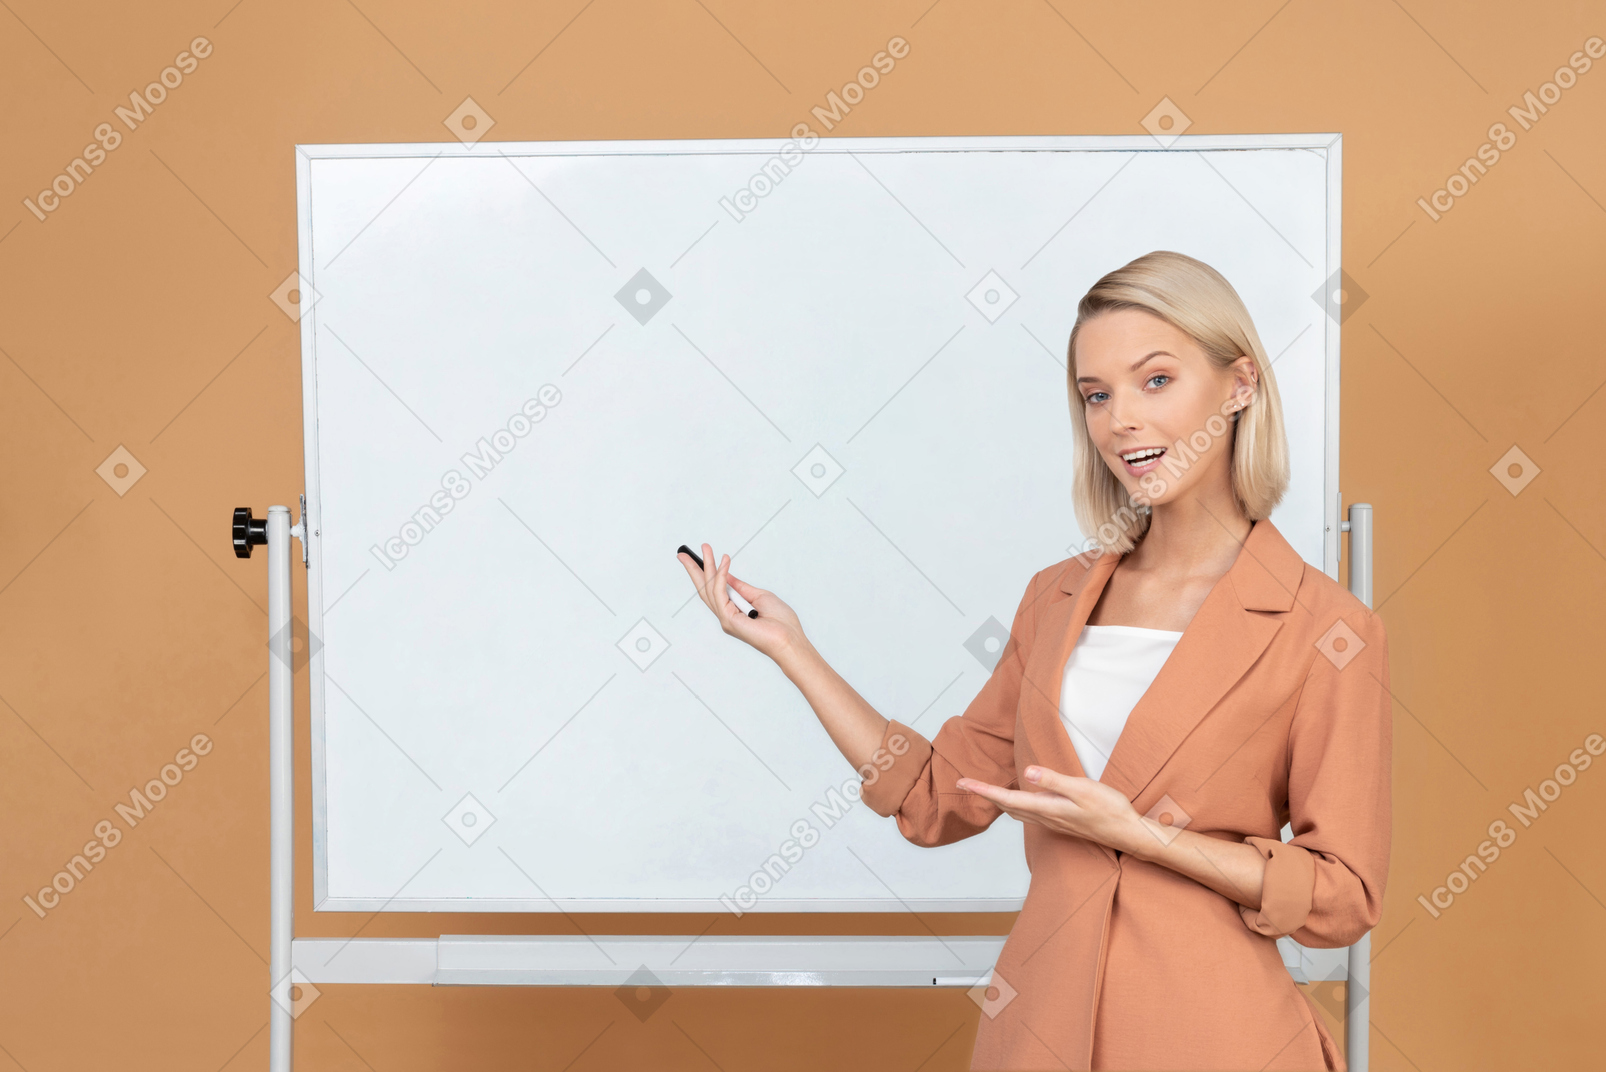 Attractive woman standing next to a whiteboard and explaining something